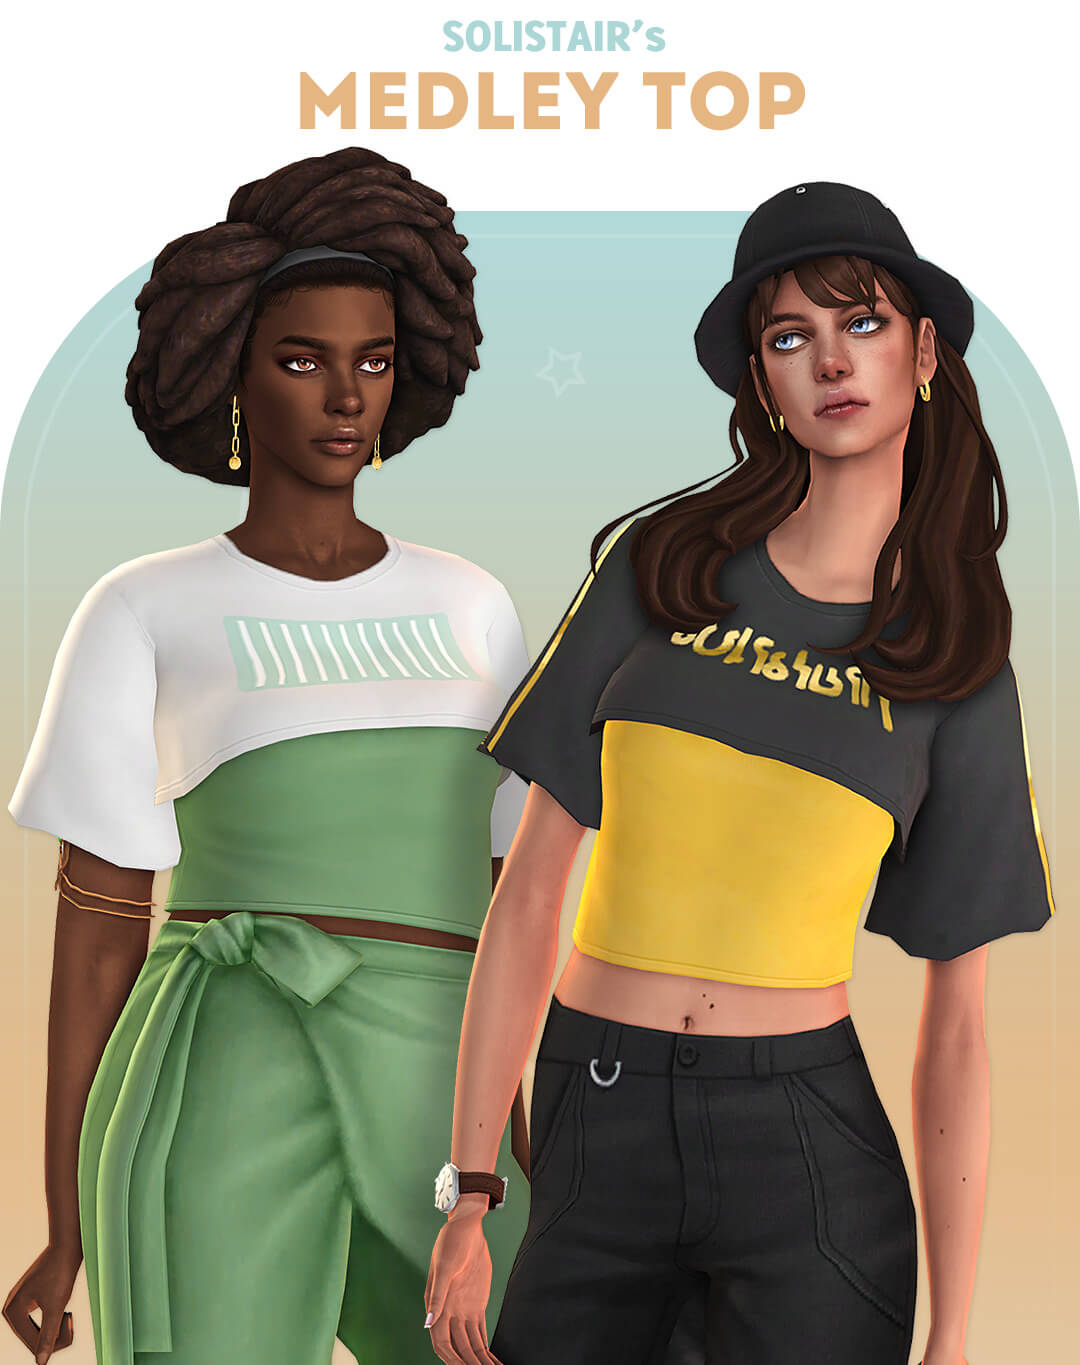 solistair medley top | The Sims Book